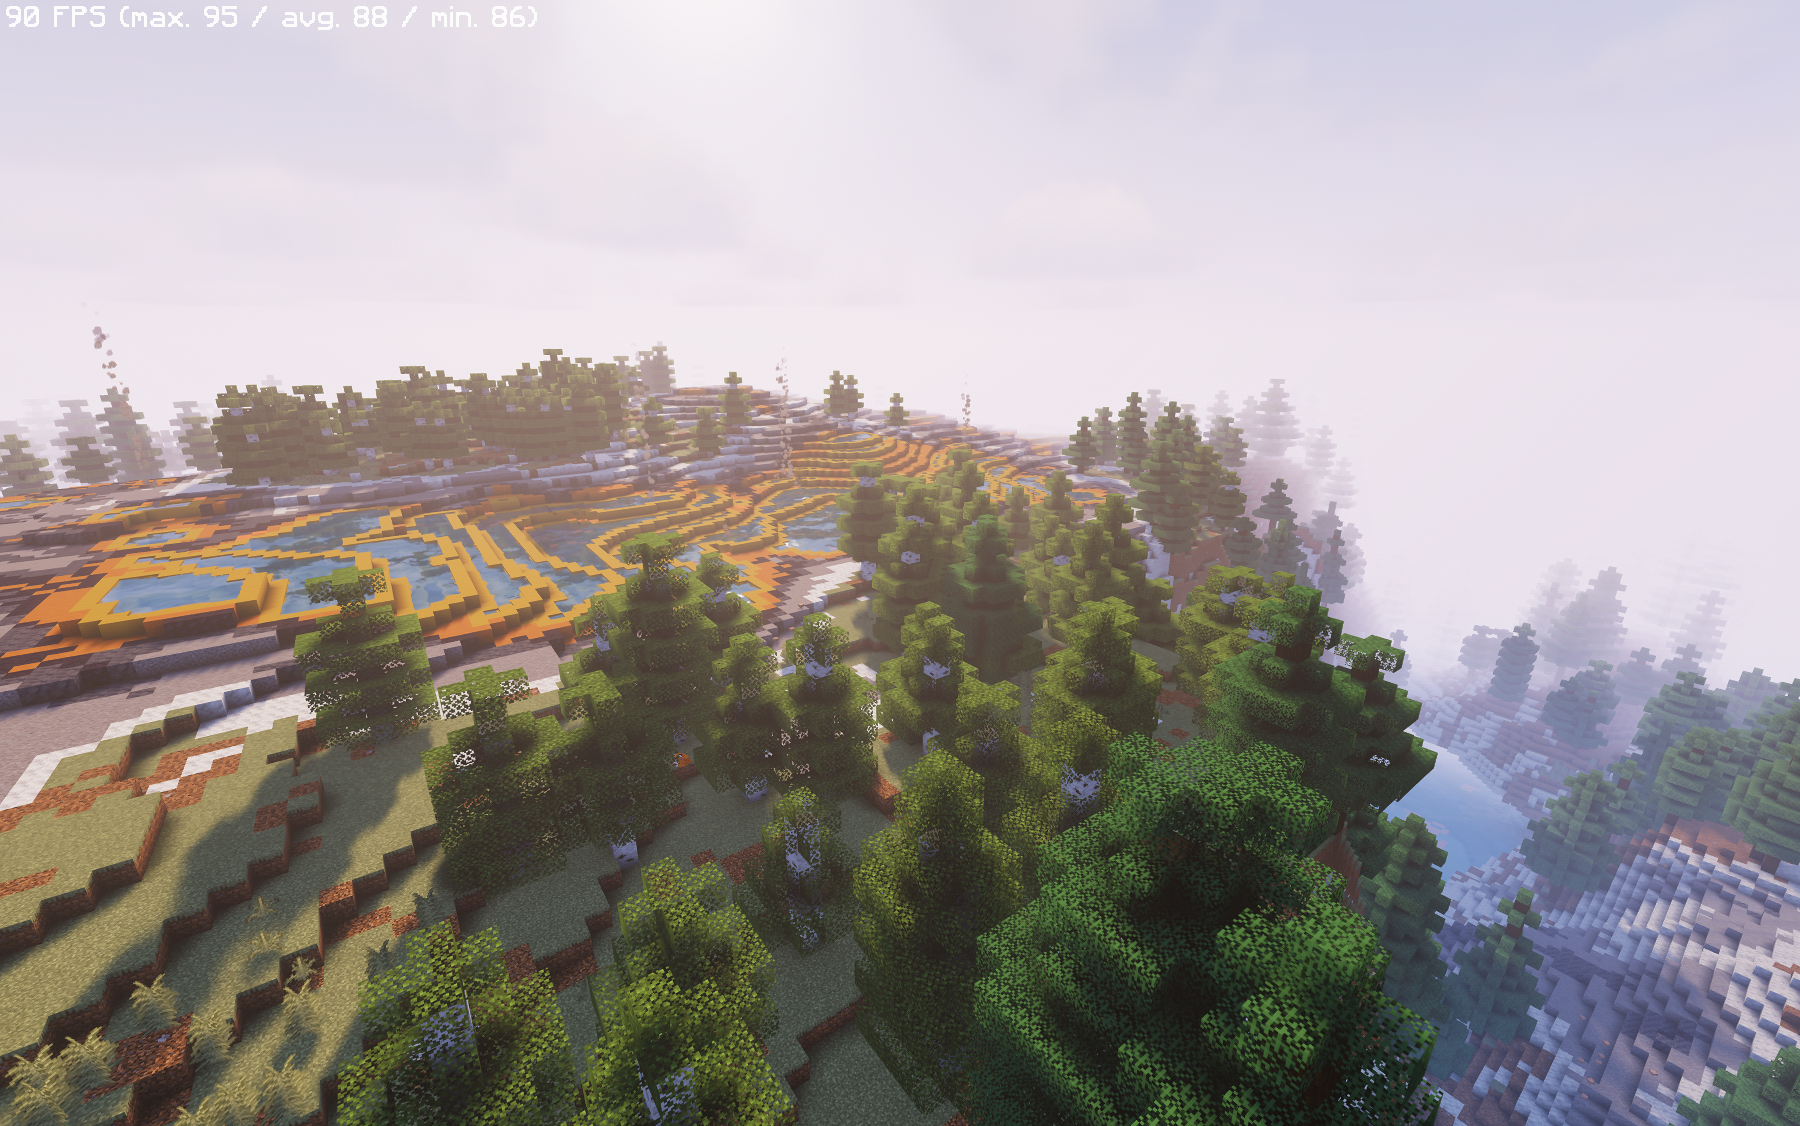 Explore Minecraft worlds with beautiful optimized shaders